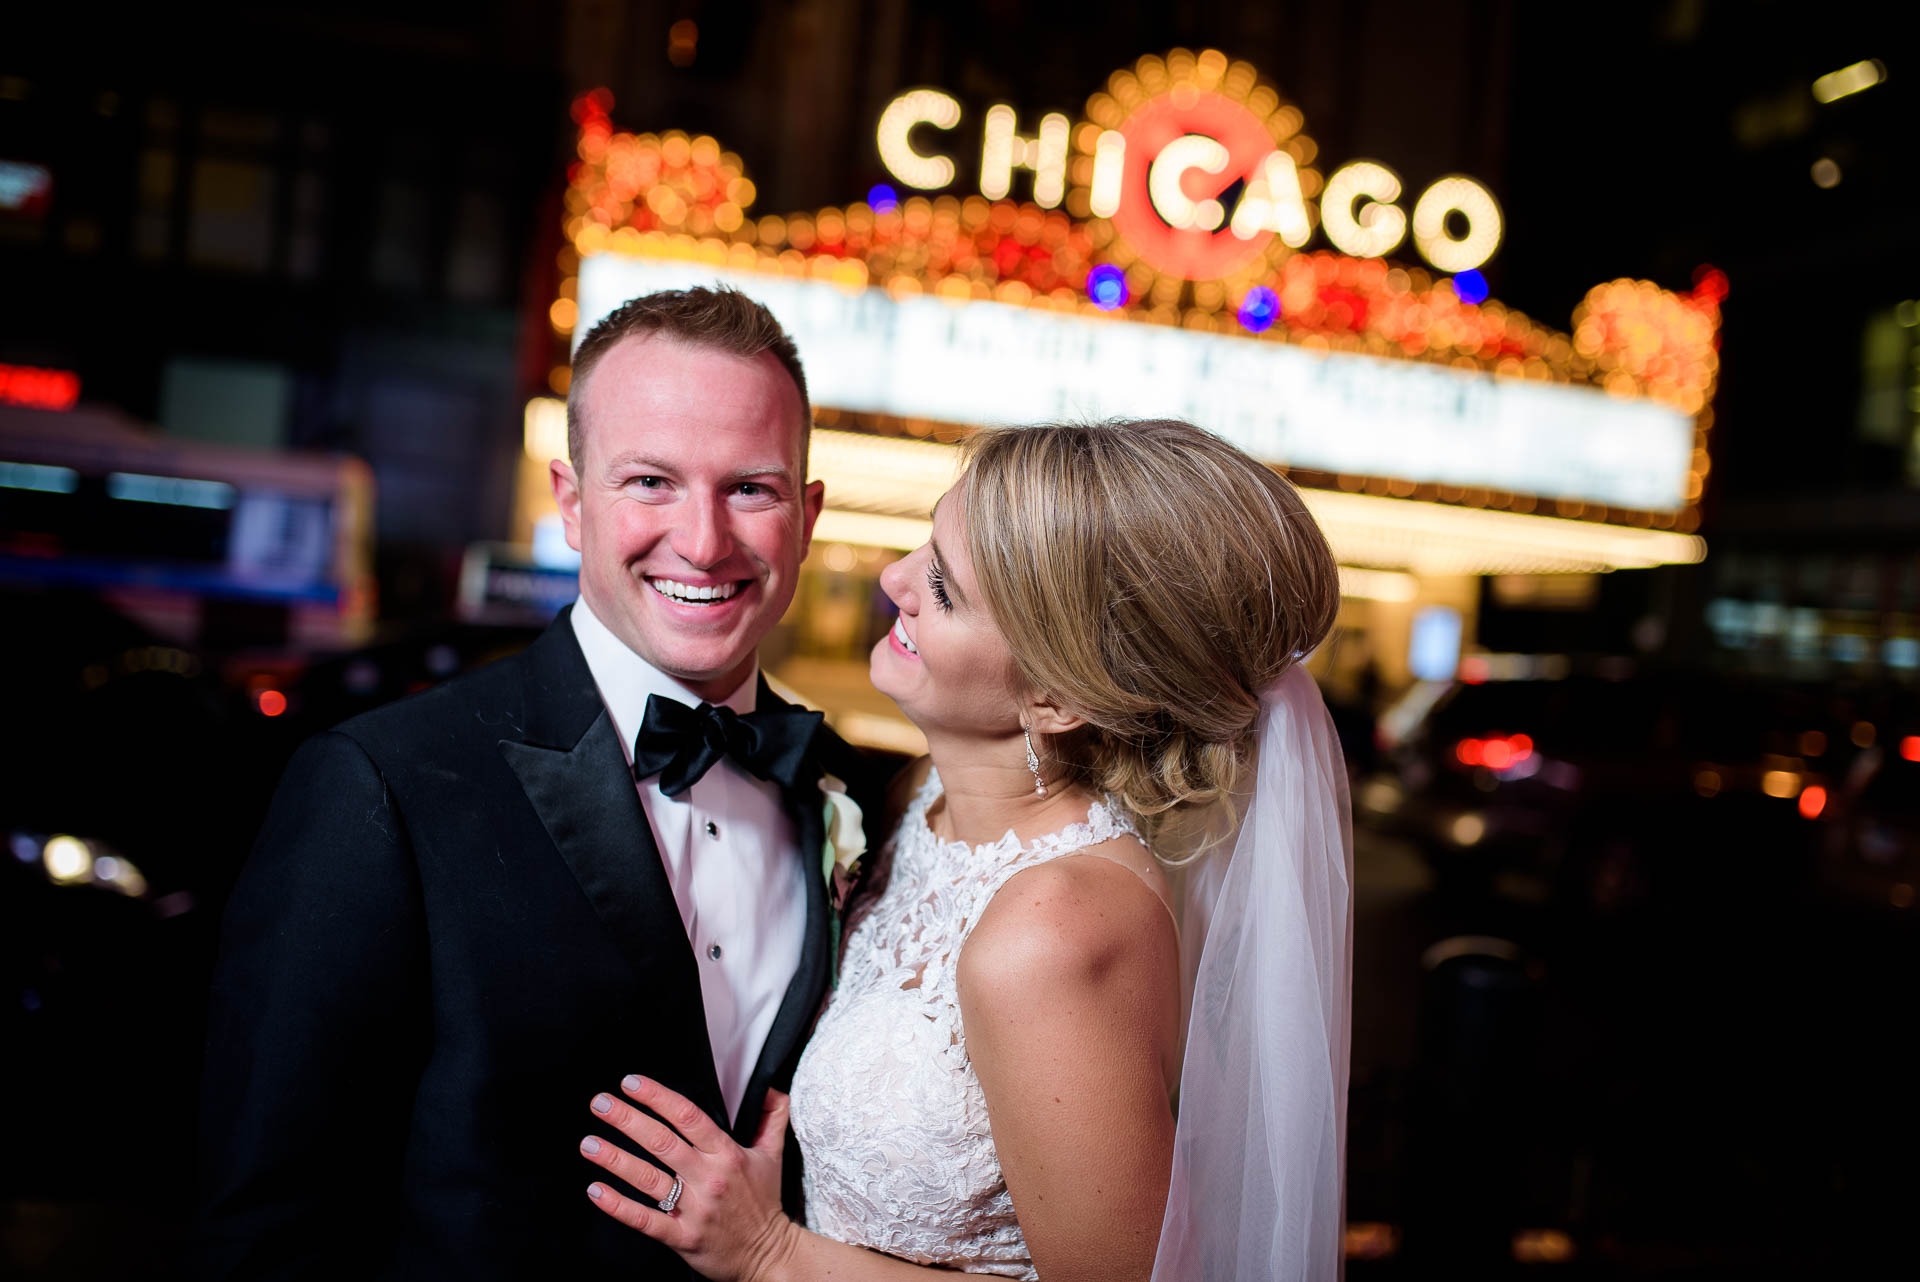 Wedding night portrait at the Chicago Theater.